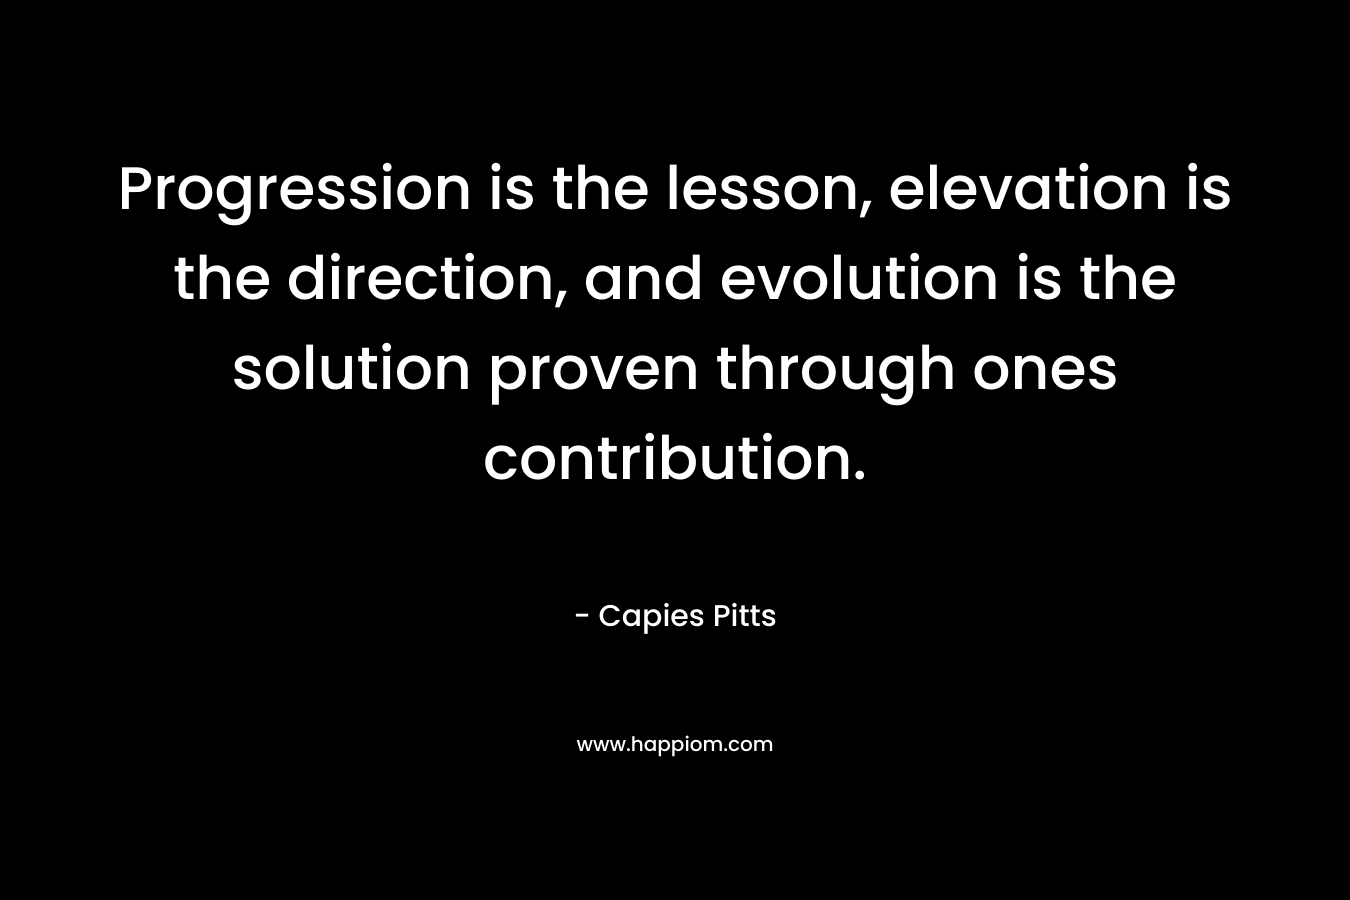 Progression is the lesson, elevation is the direction, and evolution is the solution proven through ones contribution. – Capies Pitts